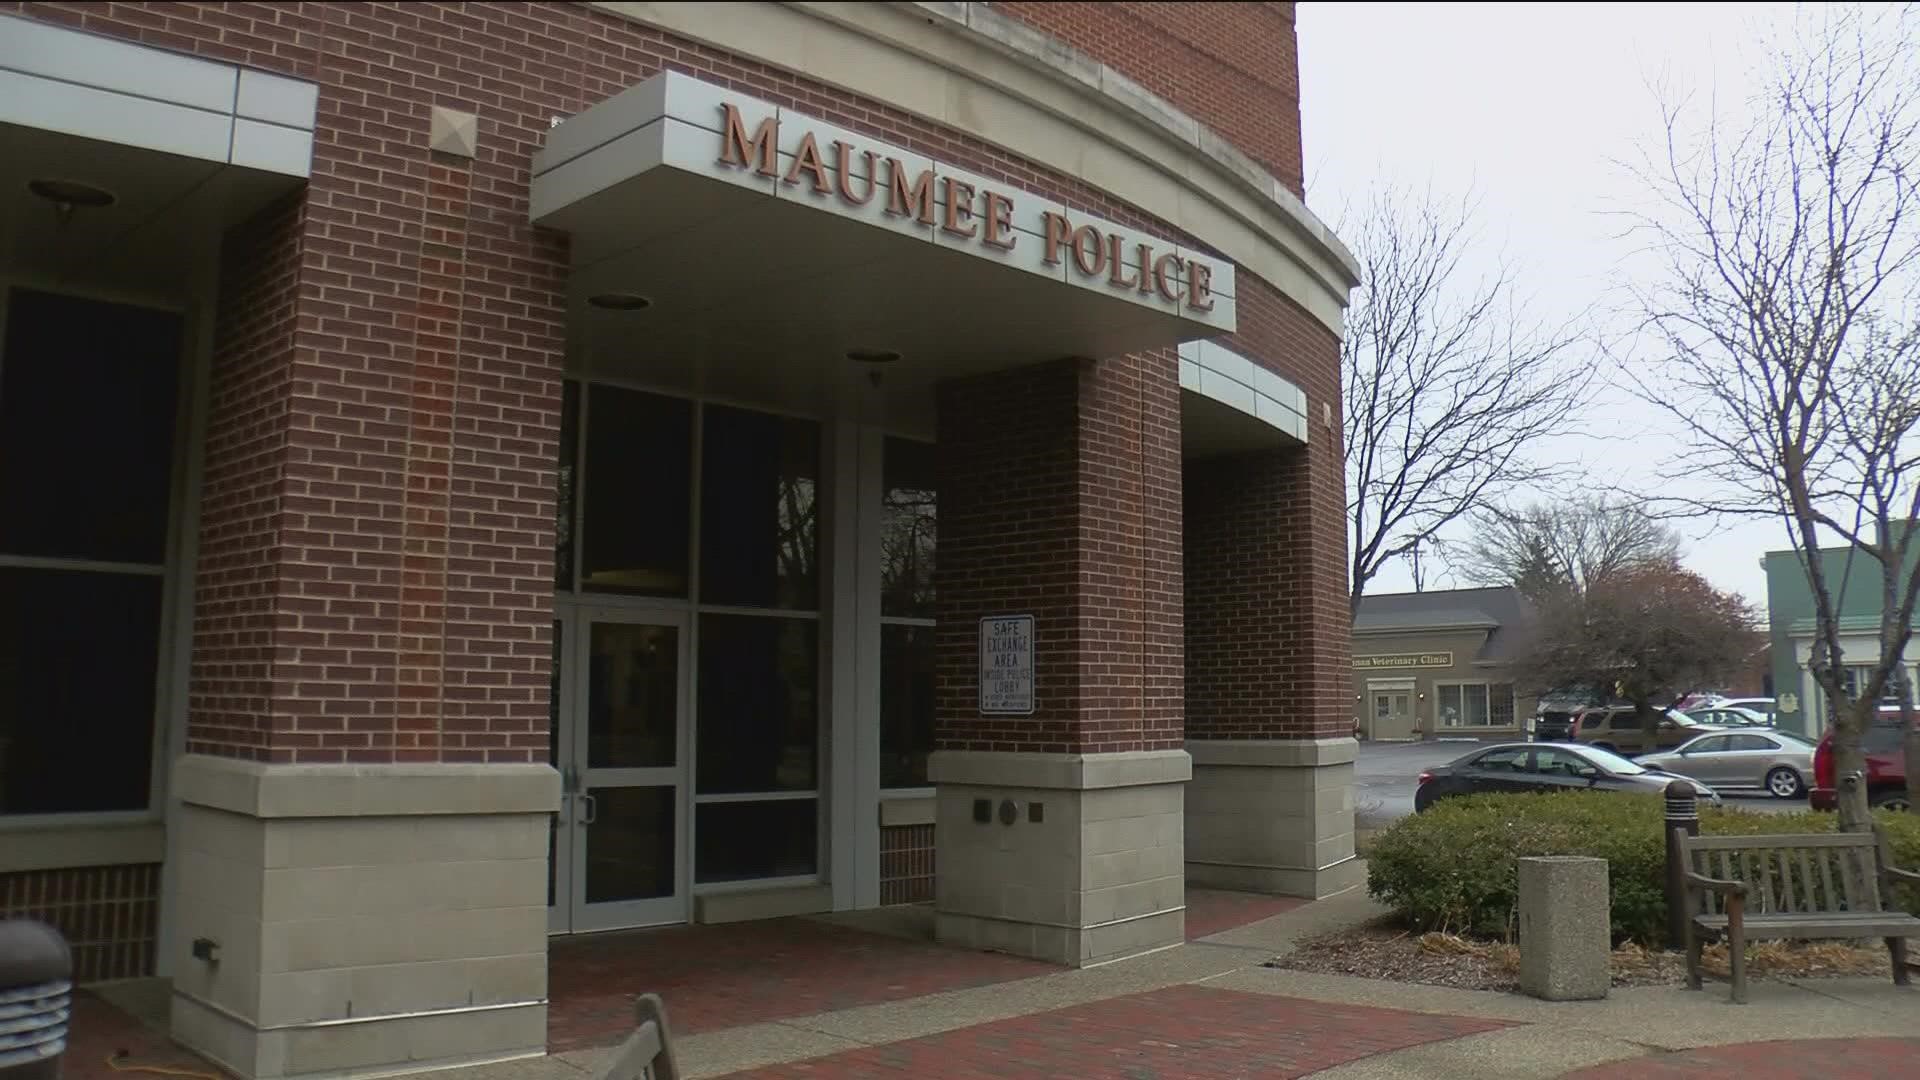 Under investigation by the city of Maumee, police Sgt. Greg Westrick told investigators he was ashamed of his membership in the anti-government group Oath Keepers.